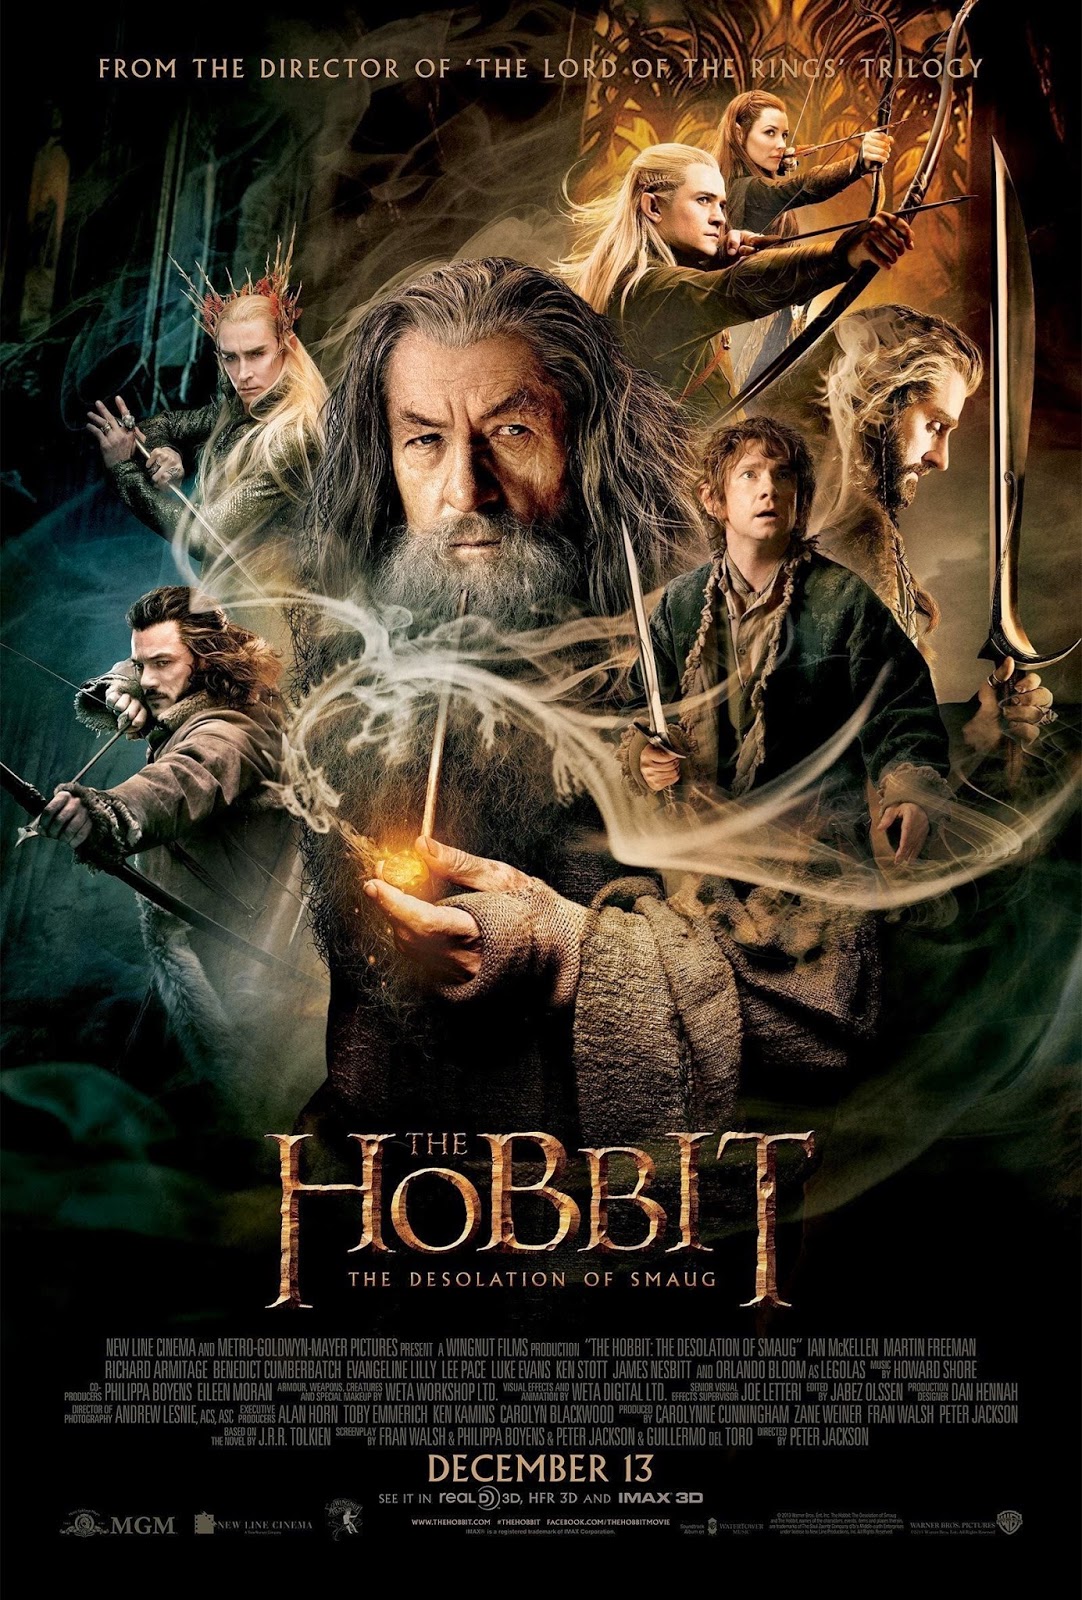 The Hobbit: The Desolation of Smaug 2013 - Full (HD)